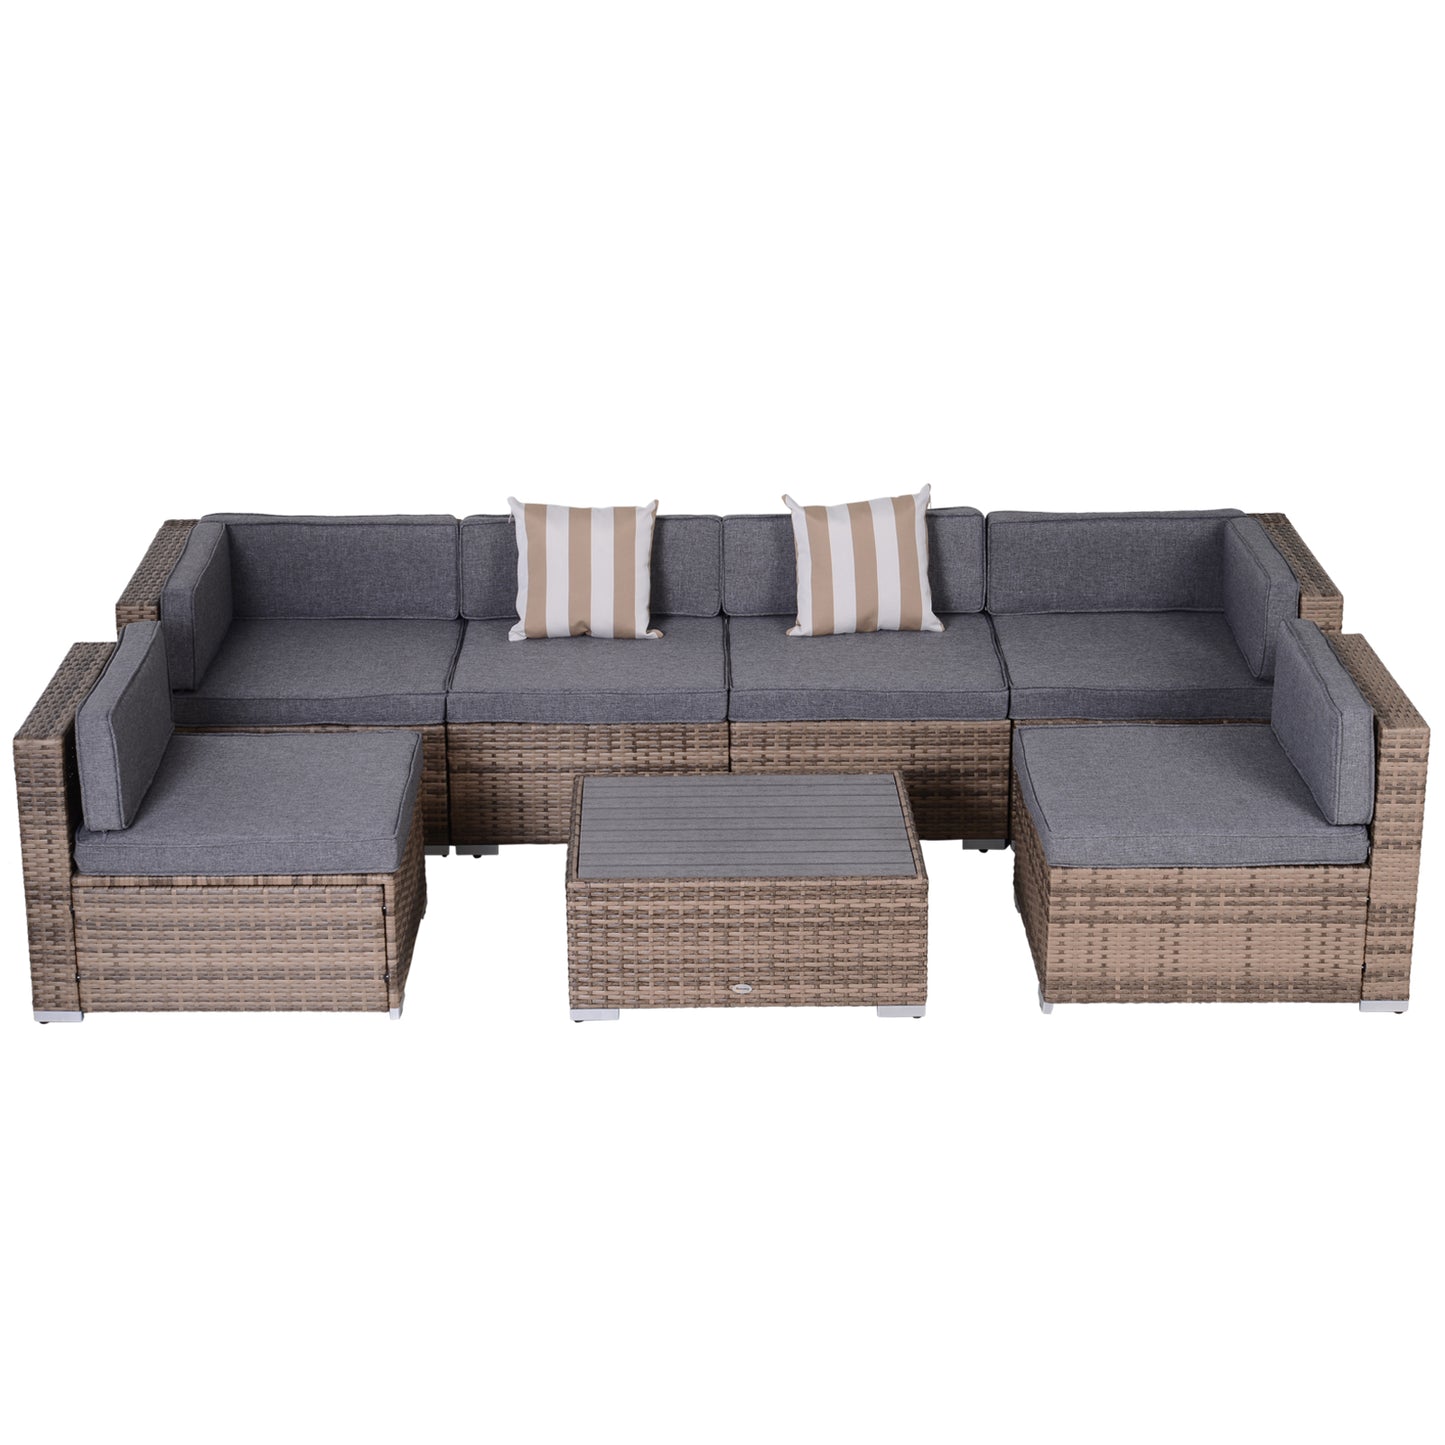 Outsunny 7-Piece Patio Furniture Sets Outdoor Wicker Conversation Sets All Weather PE Rattan Sectional sofa set, Grey